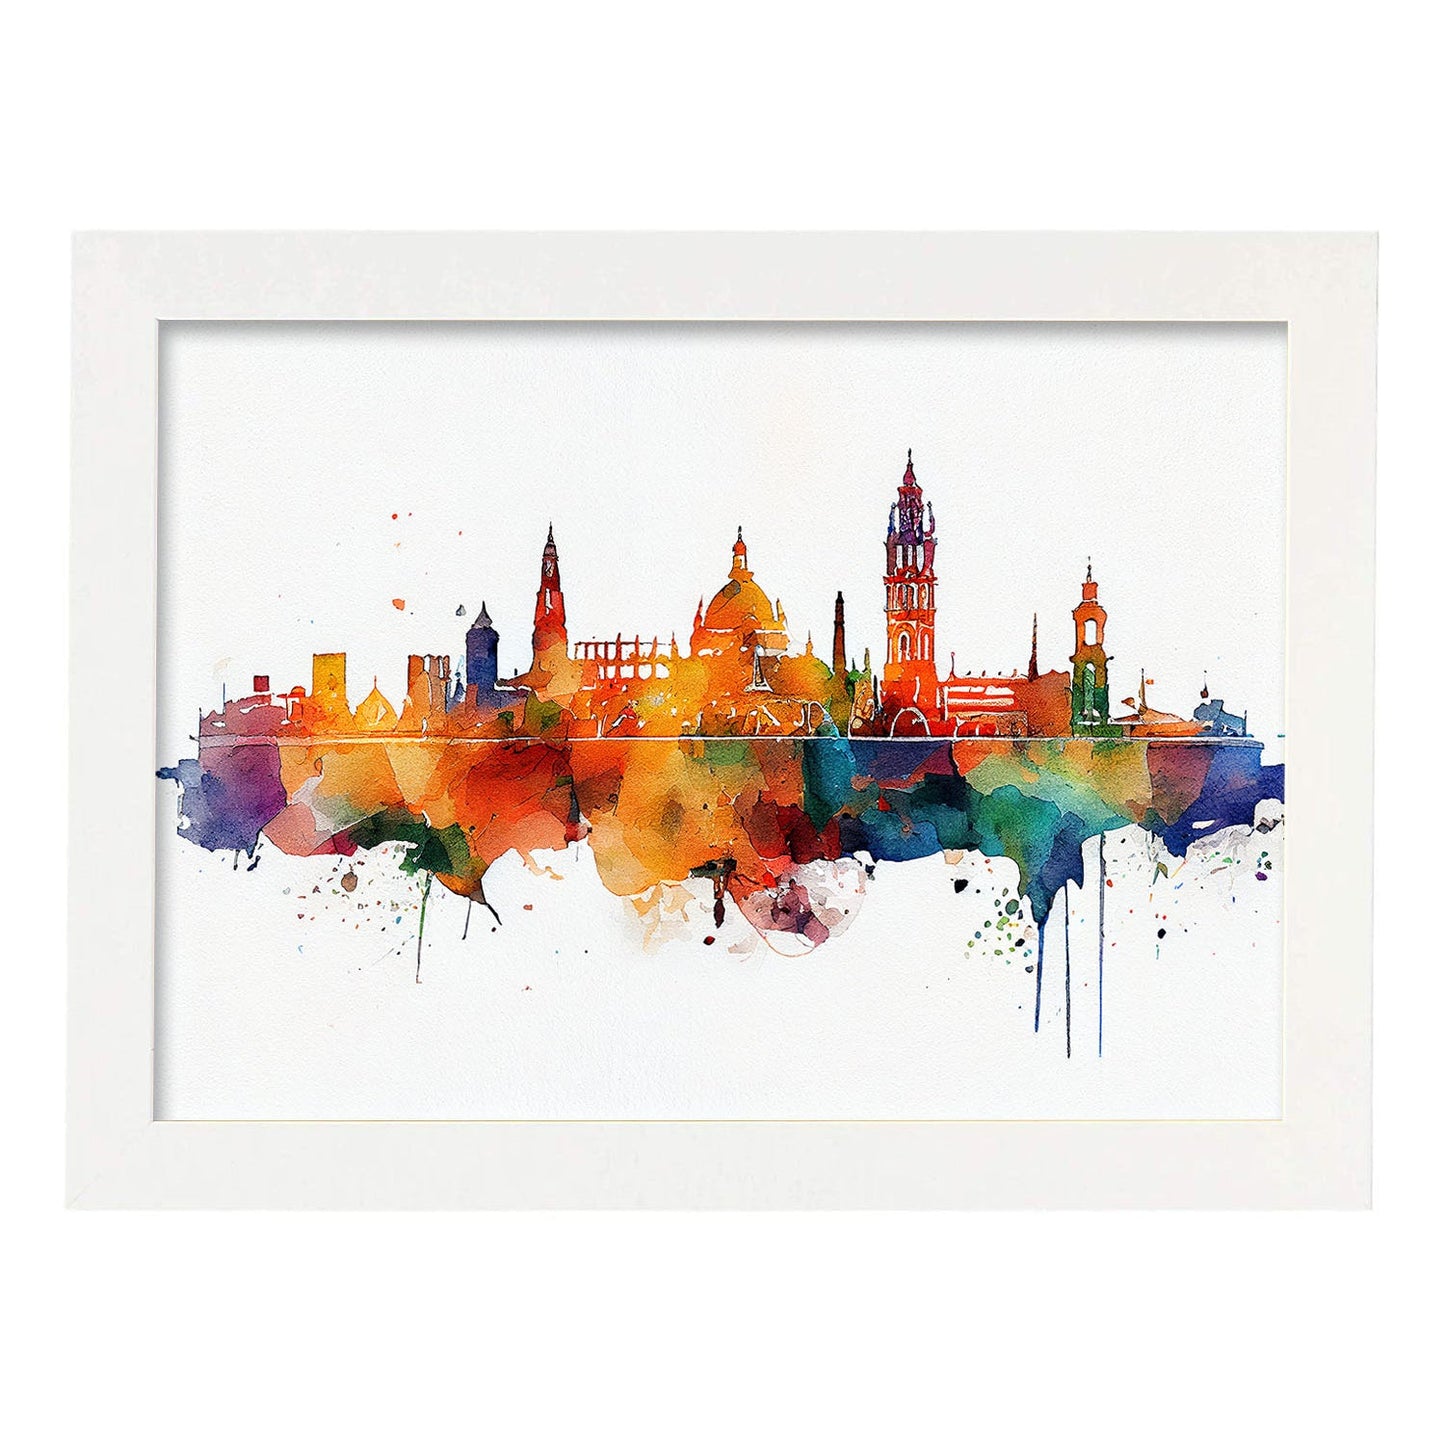 Nacnic watercolor of a skyline of the city of Seville. Aesthetic Wall Art Prints for Bedroom or Living Room Design.-Artwork-Nacnic-A4-Marco Blanco-Nacnic Estudio SL